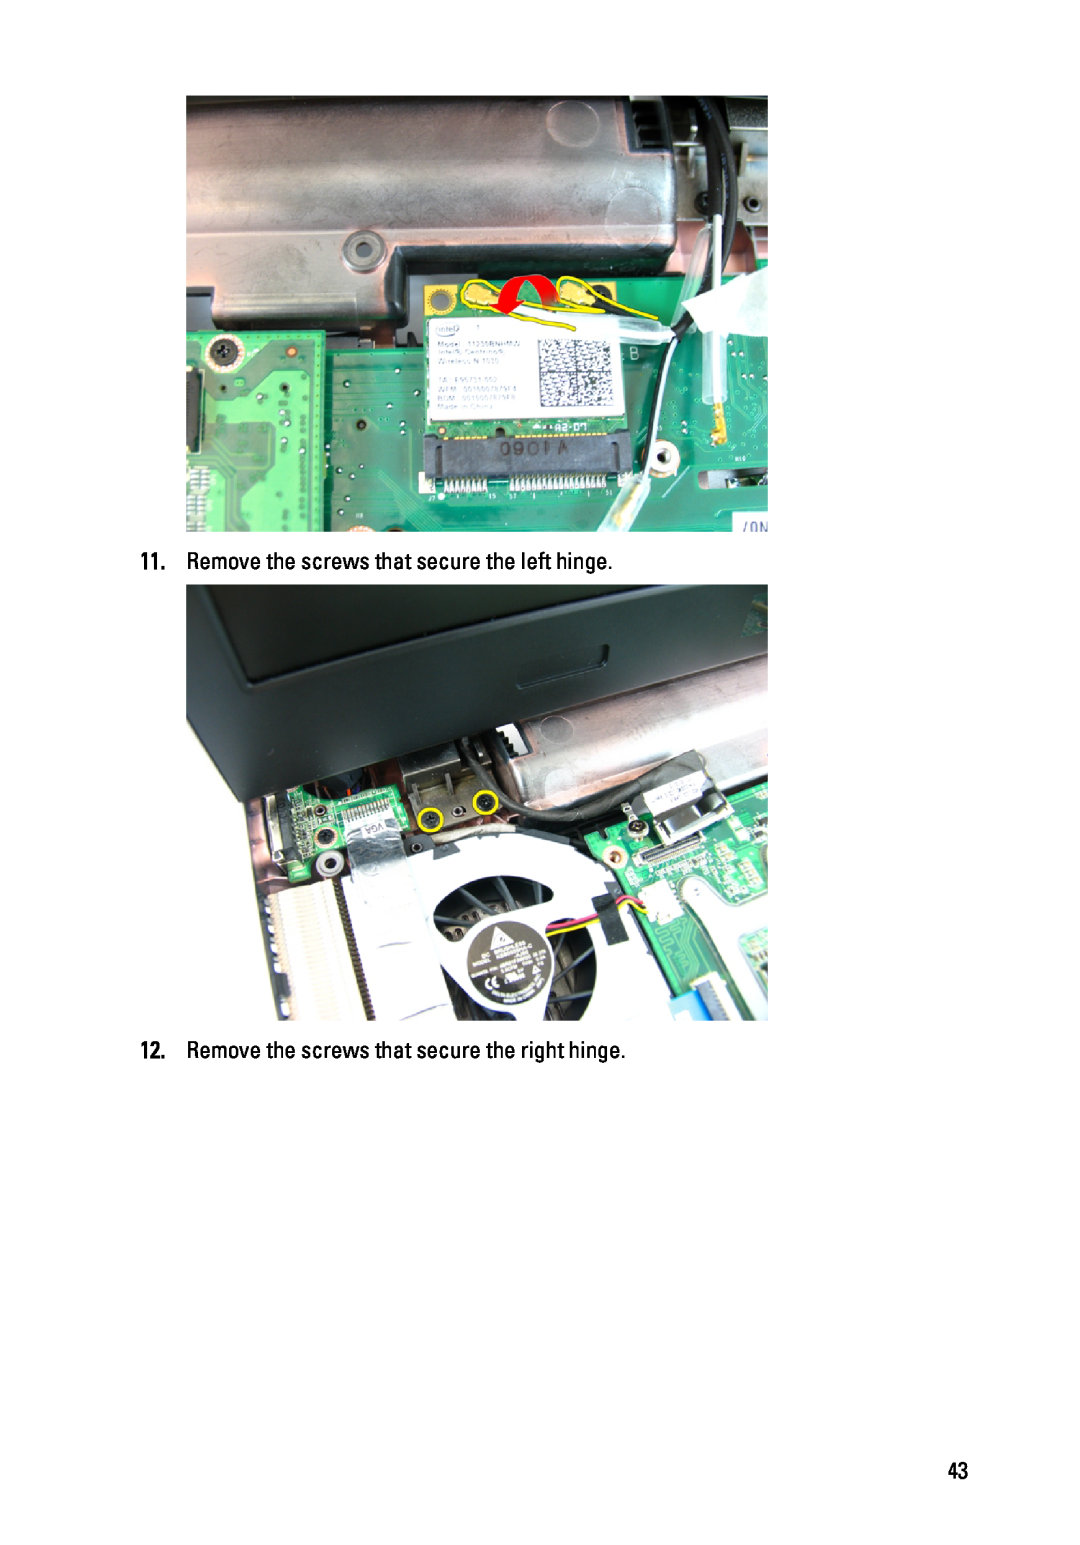 Dell 3450 owner manual Remove the screws that secure the left hinge, Remove the screws that secure the right hinge 